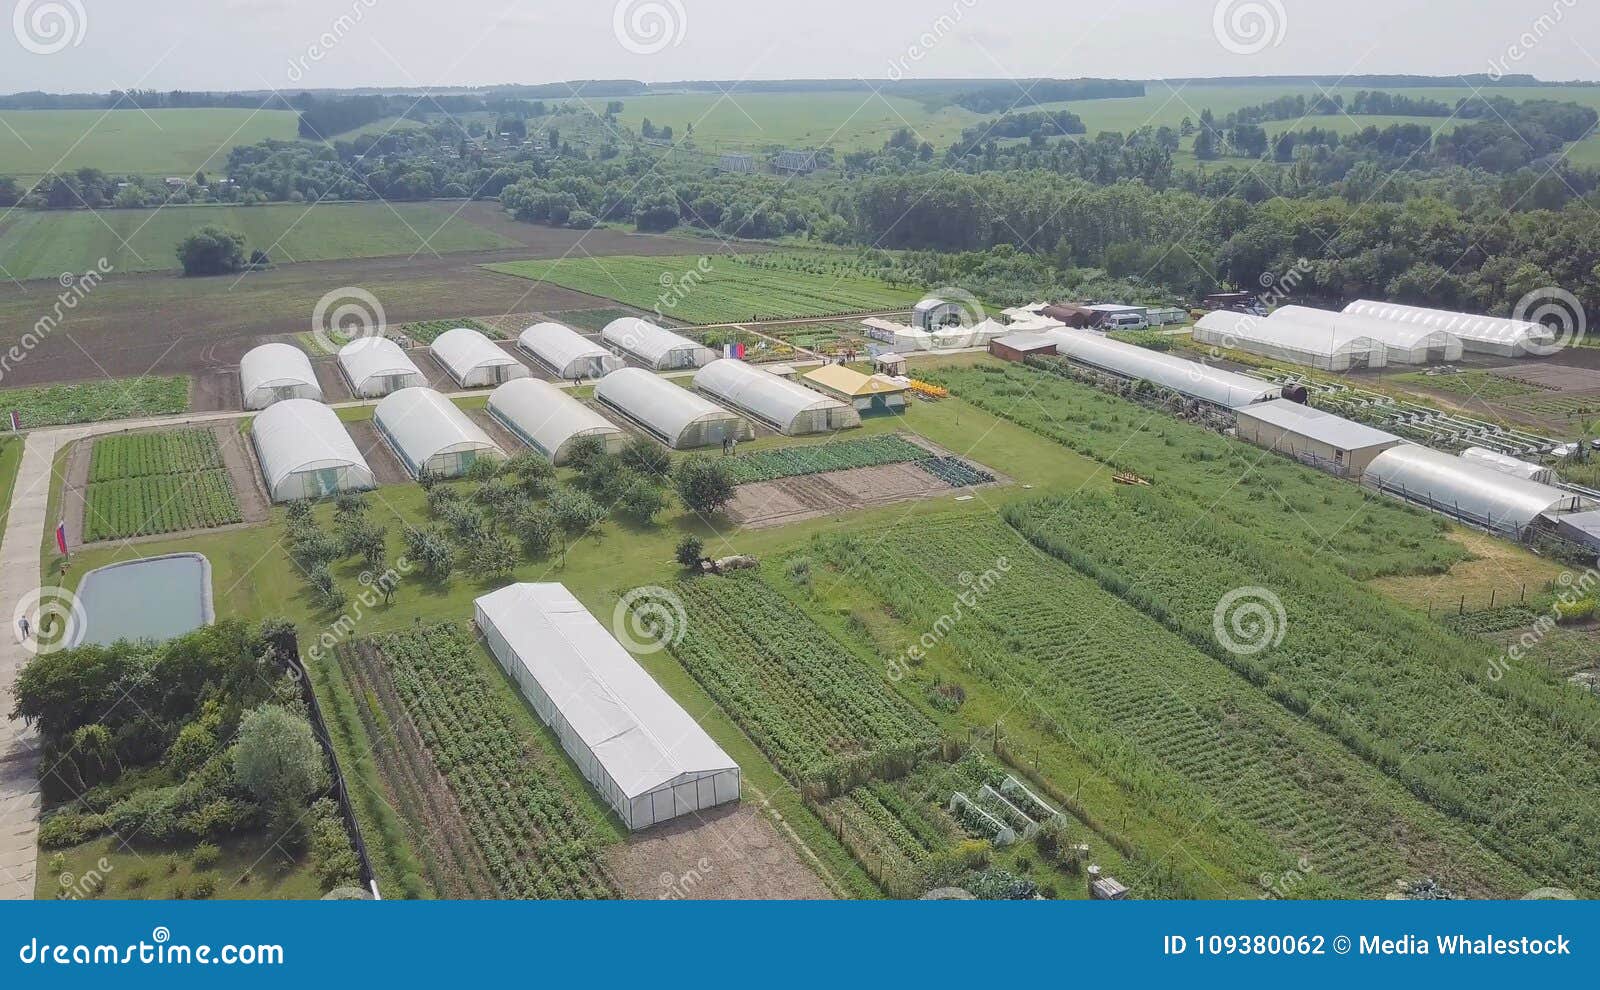 frameworks of greenhouses, top view. clip. construction of greenhouses in the field. agriculture, agrotechnics of closed